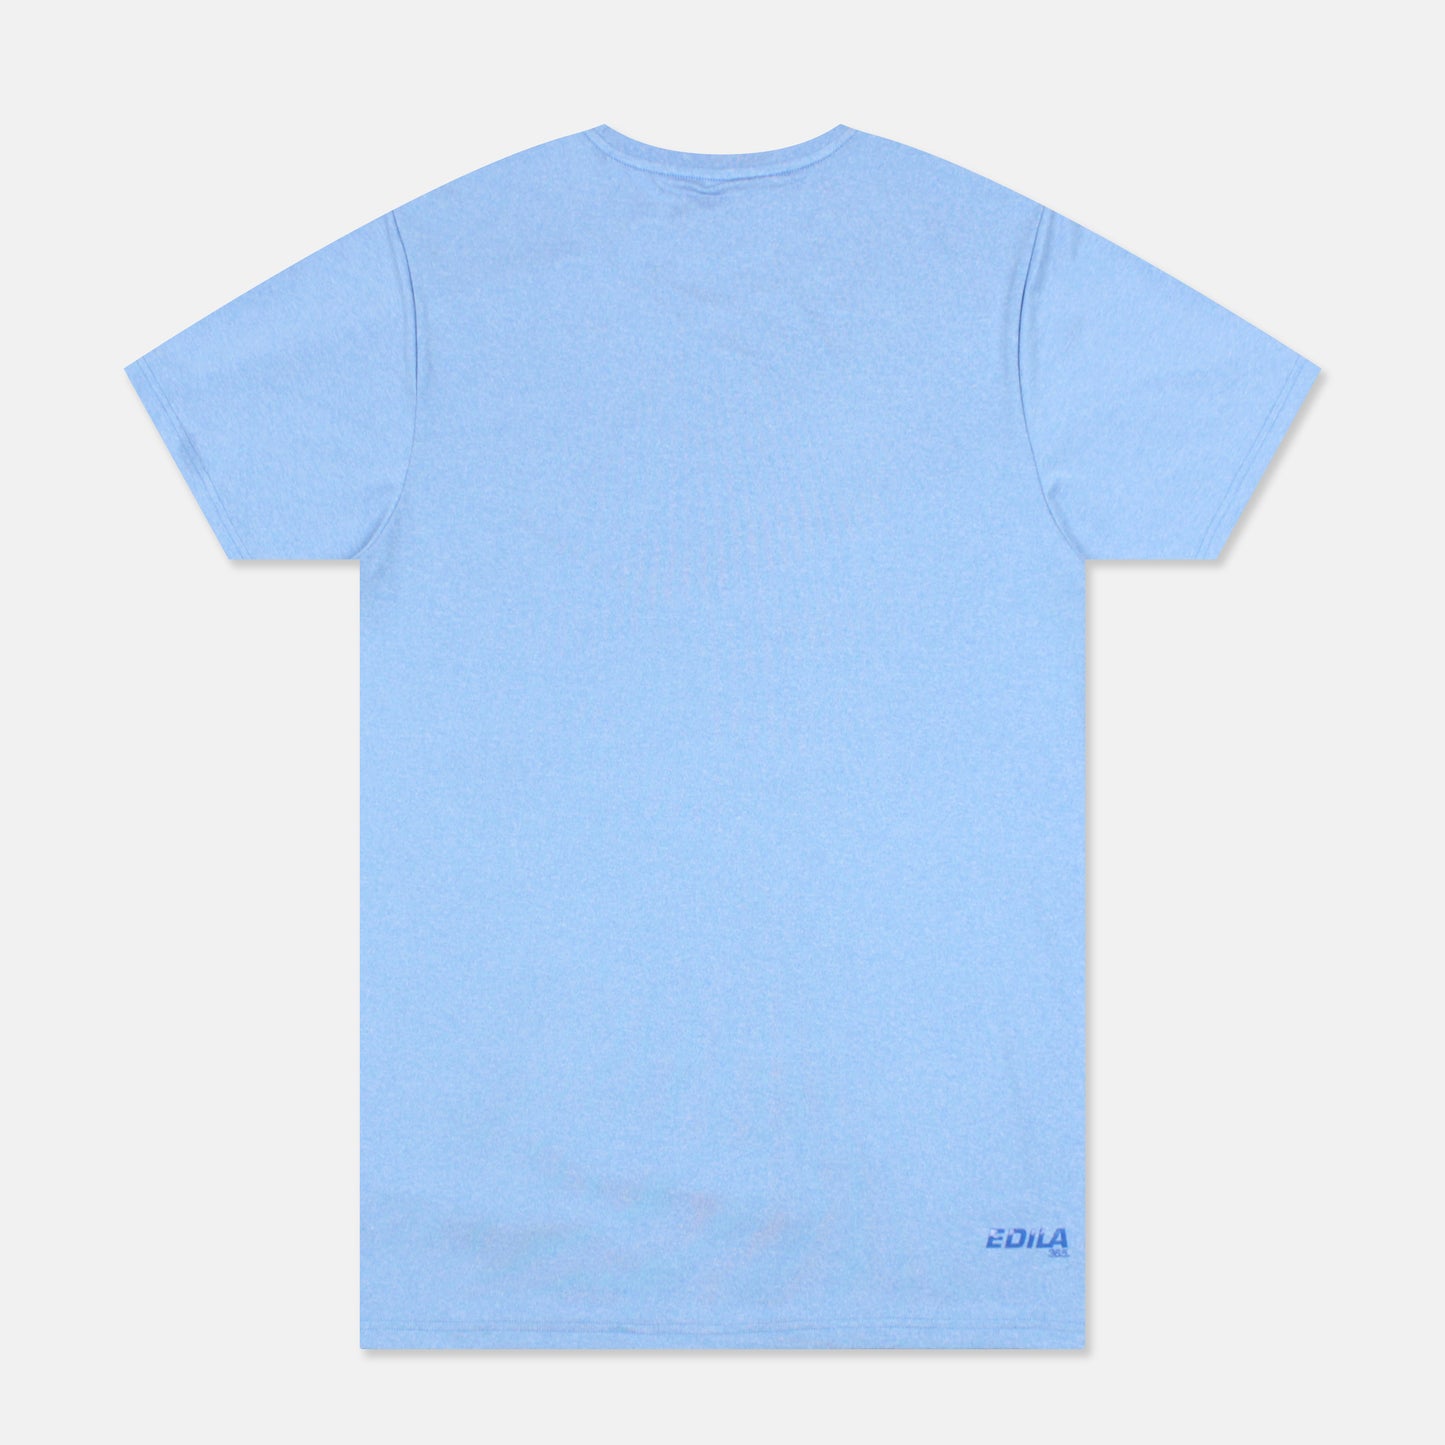 THE ACTIVE TEE